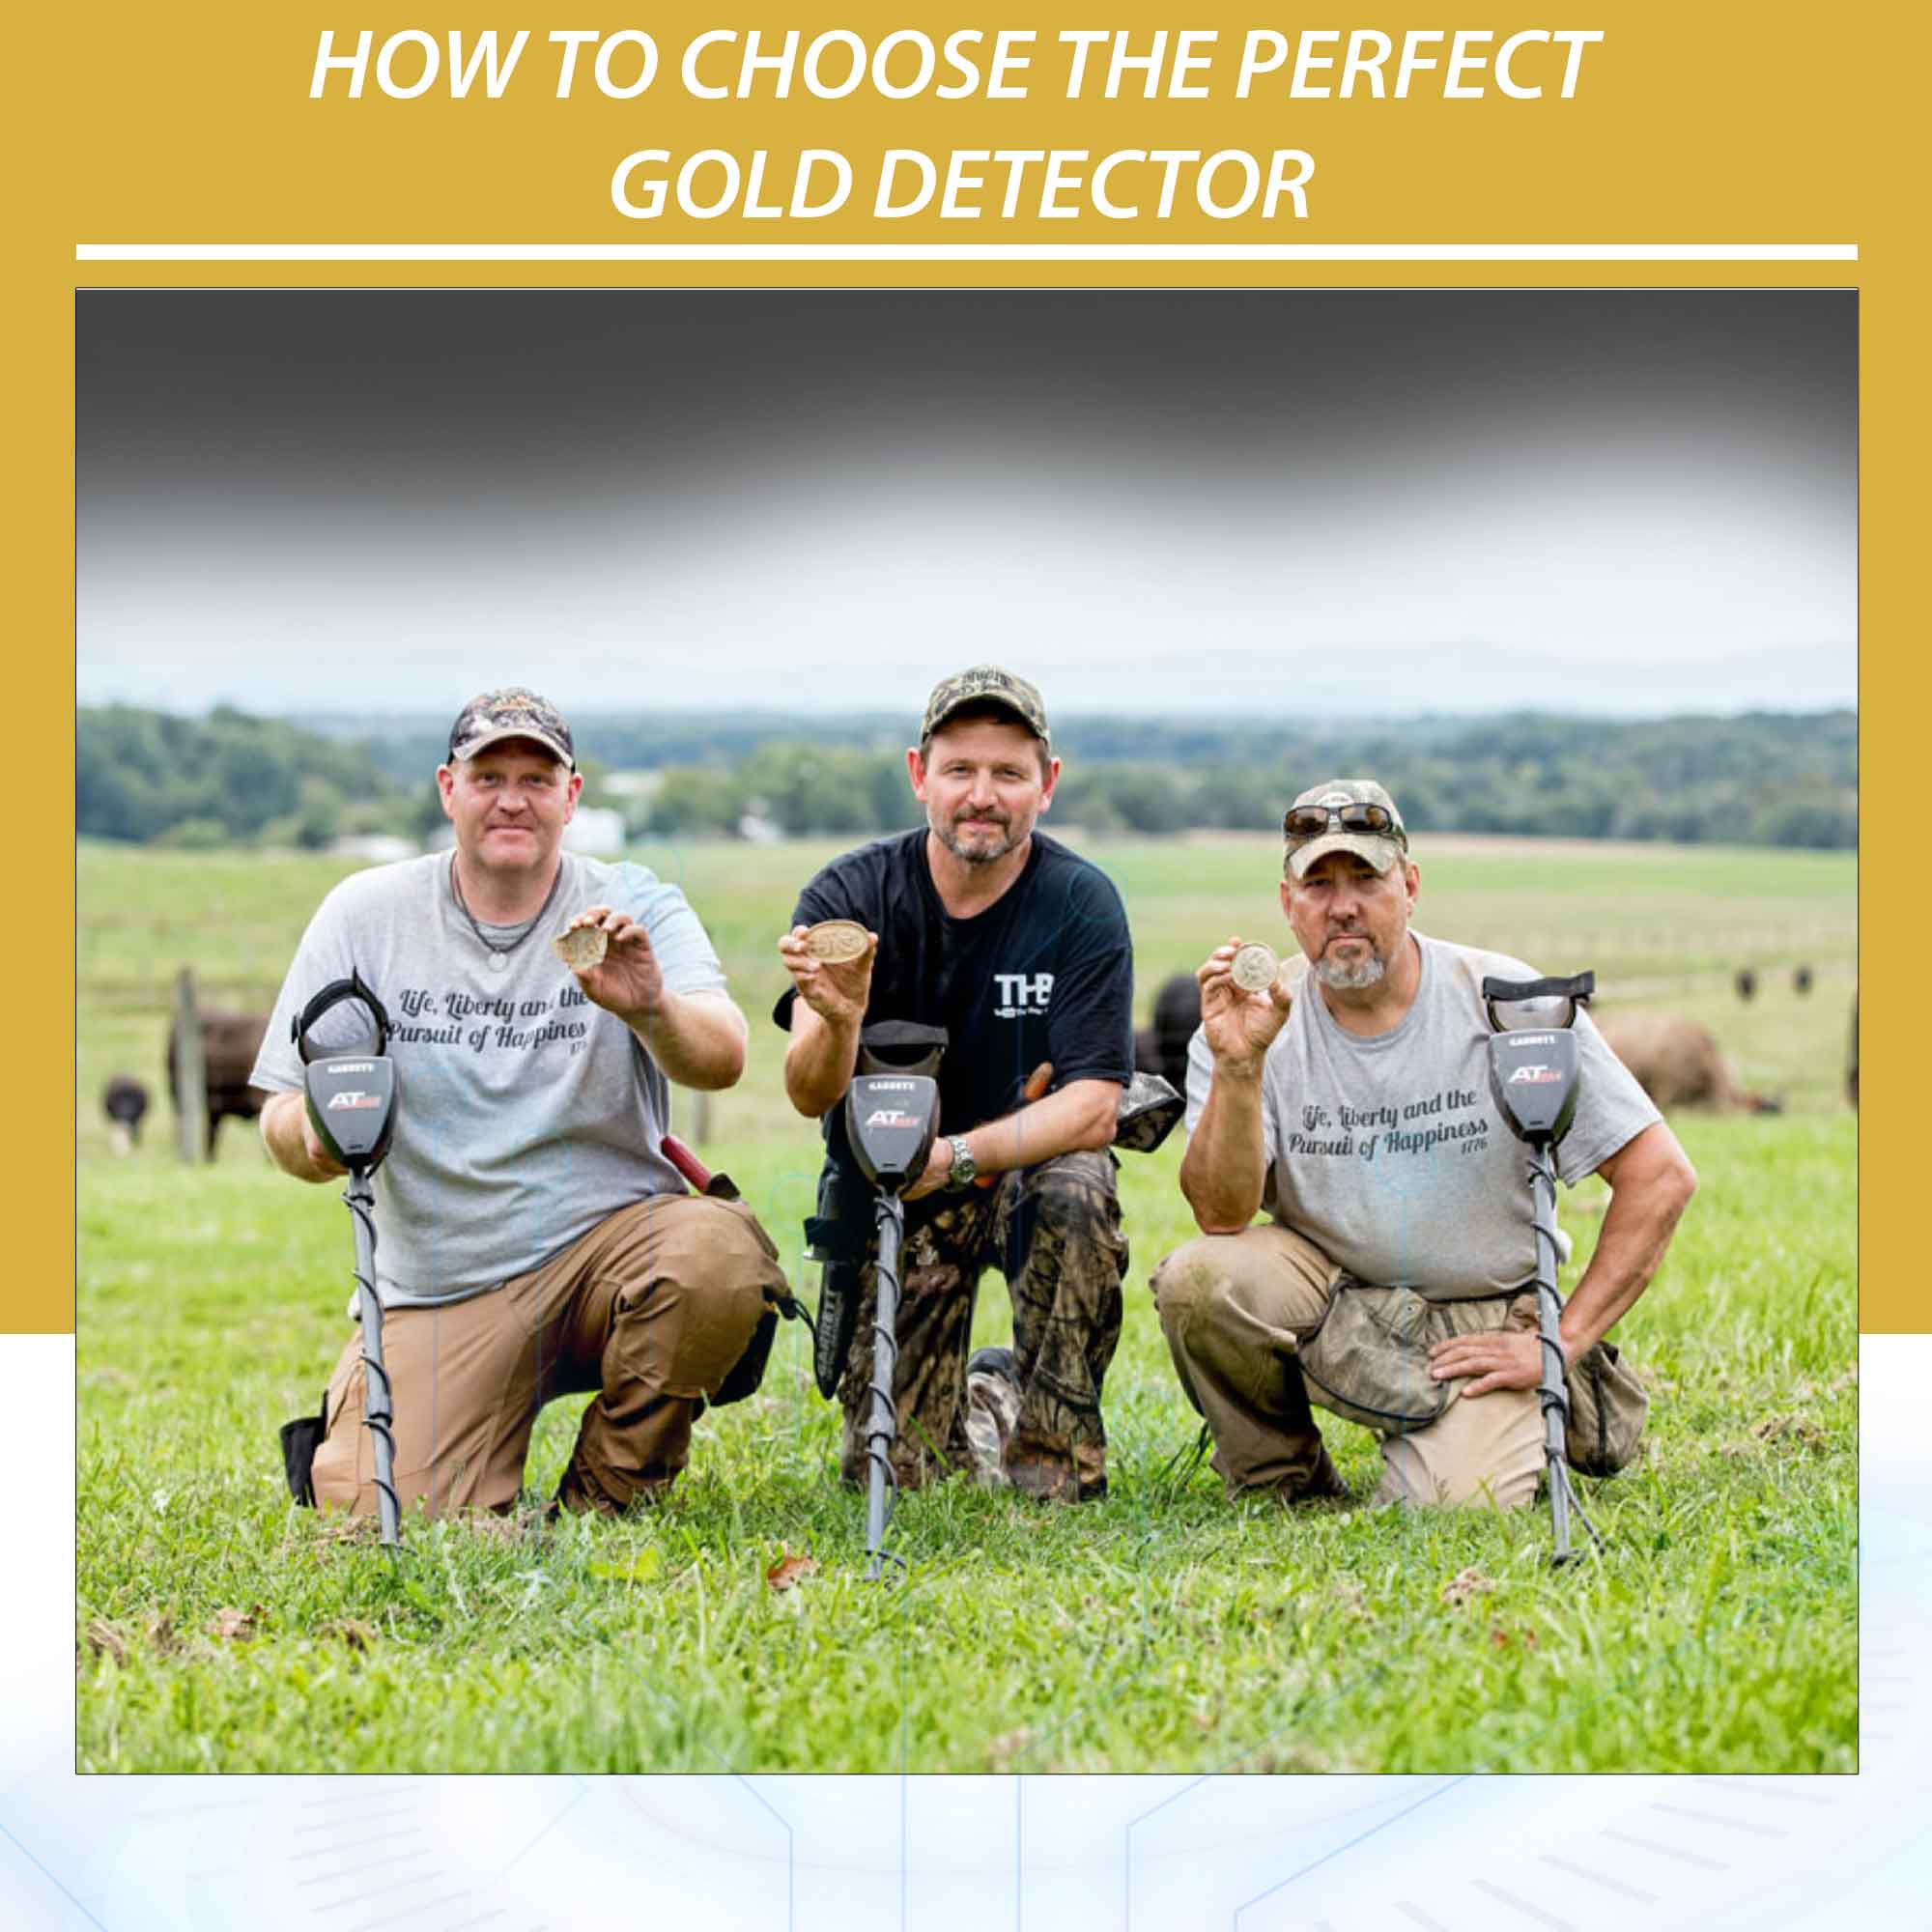 How to choose the perfect gold detector